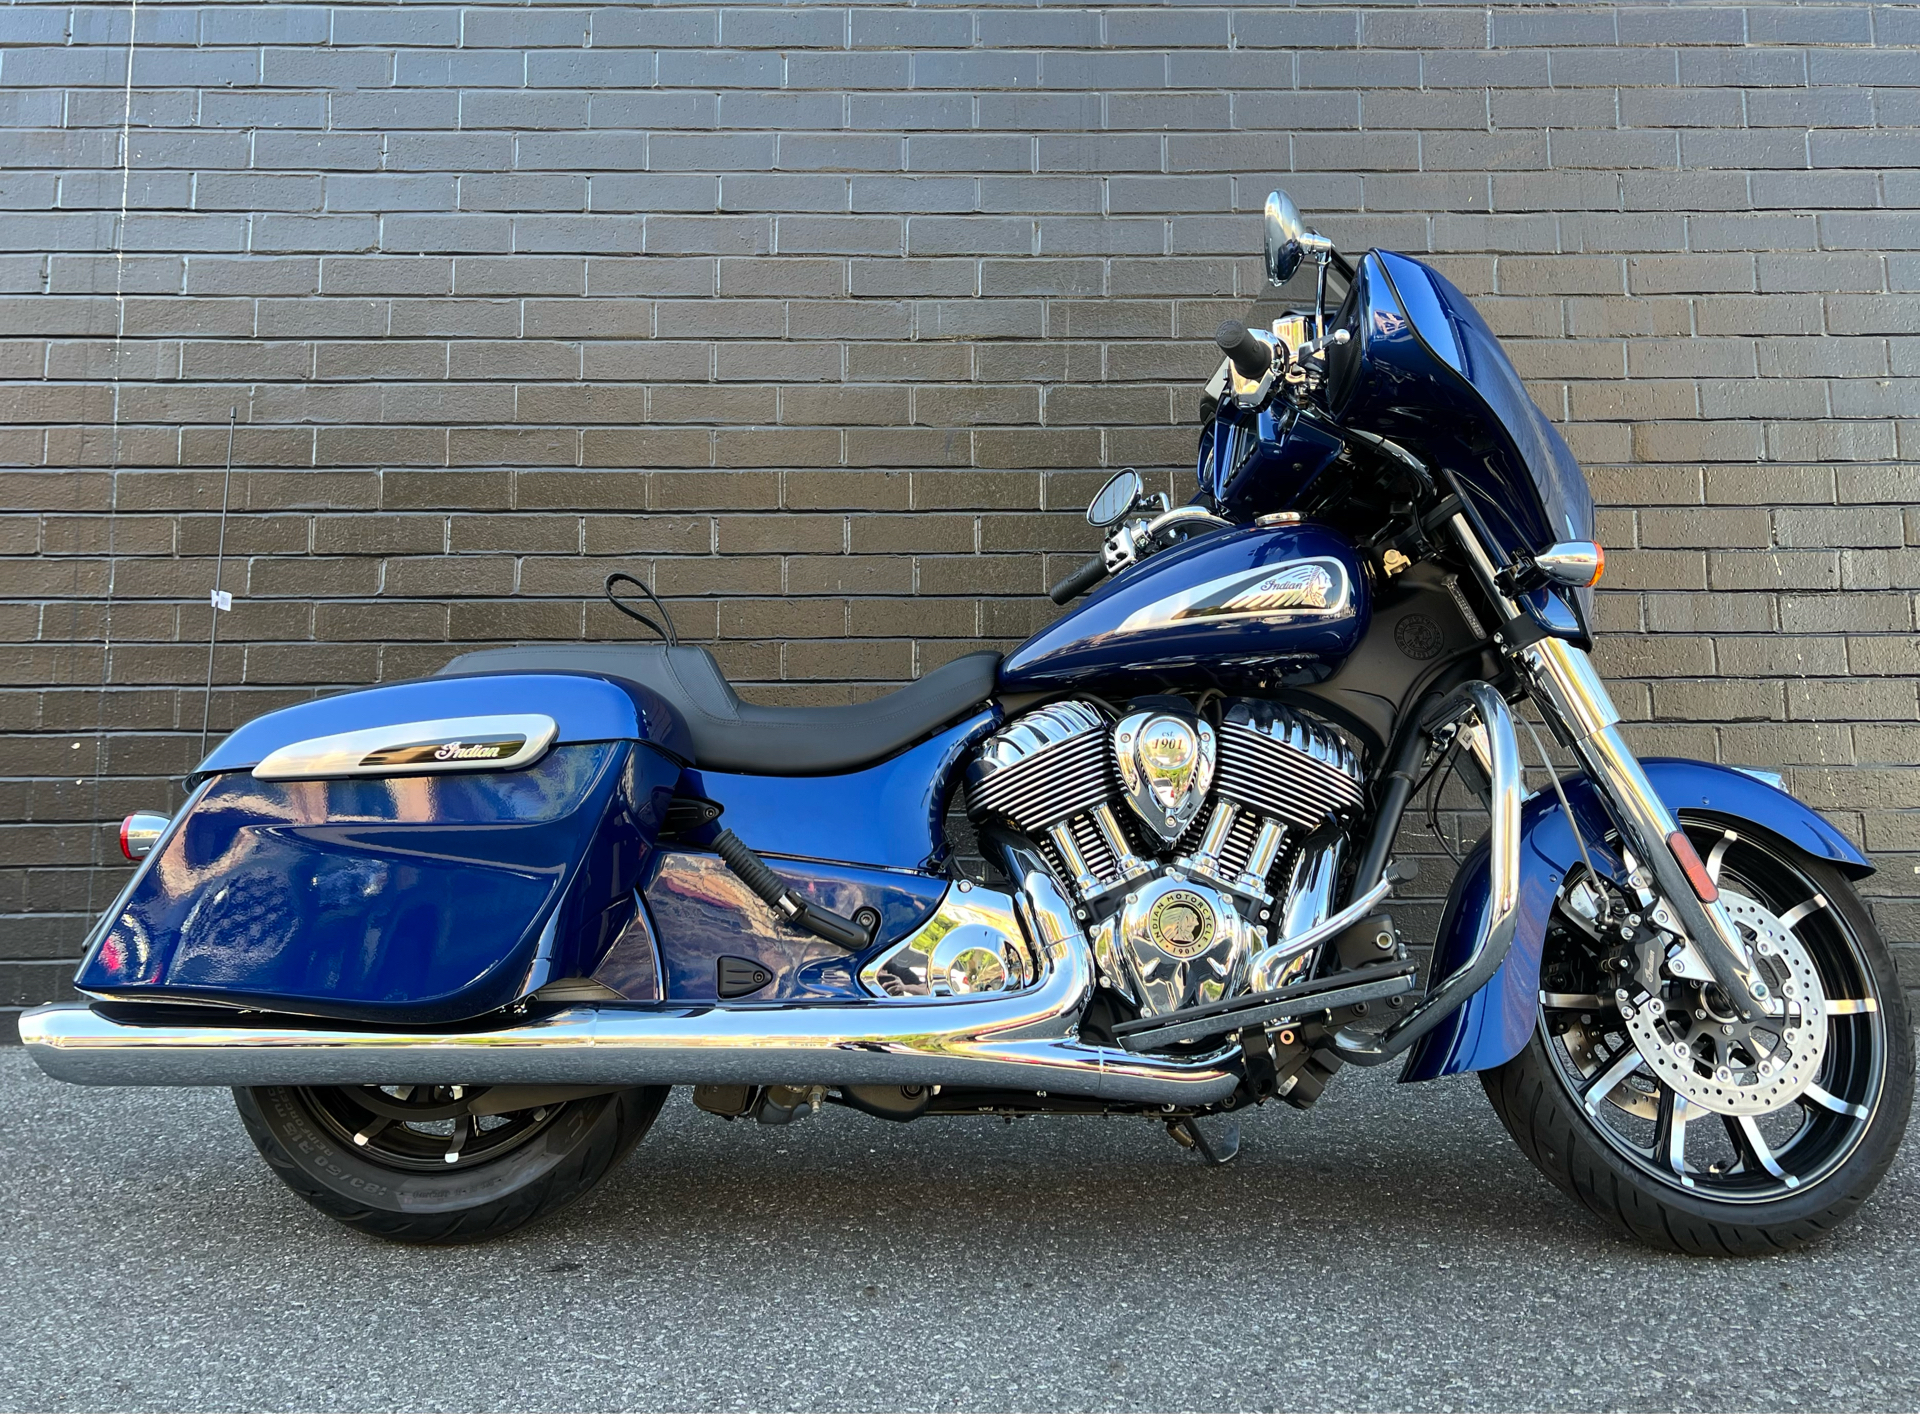 2022 Indian Chieftain® Limited in San Jose, California - Photo 1